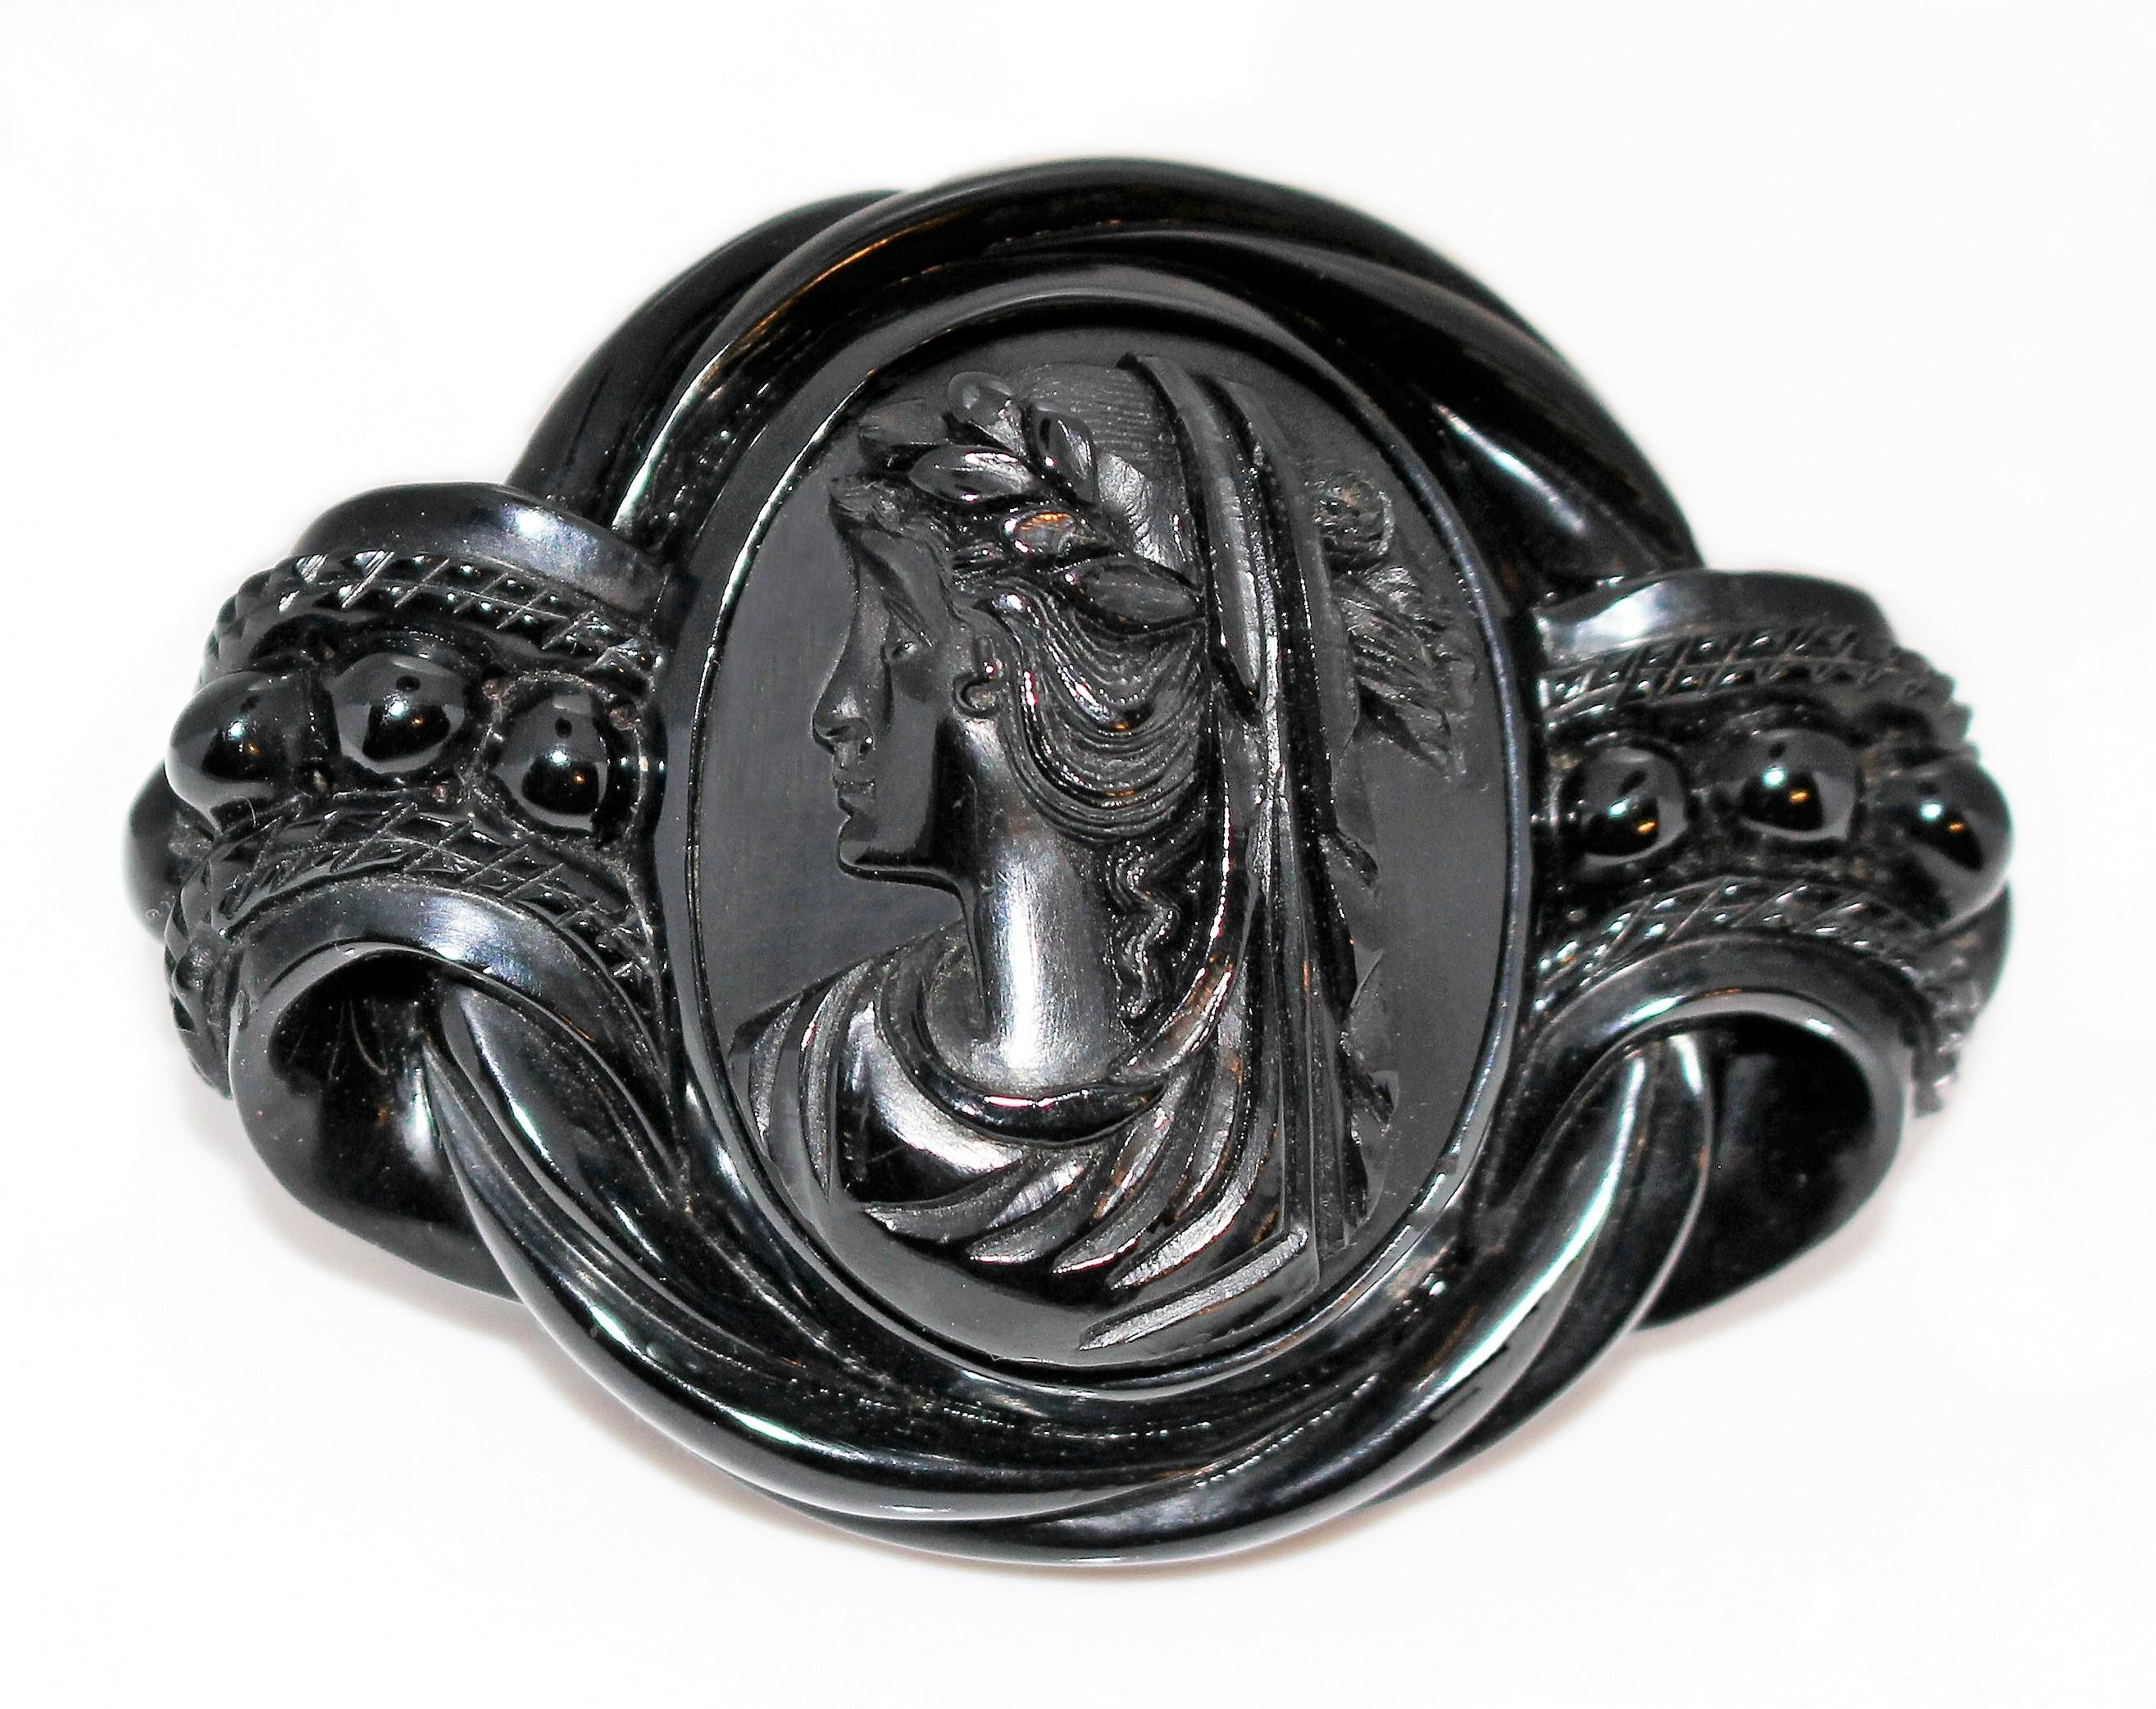 Circa 1880s Victorian Whitby jet brooch with an ornately carved raised swirl design surrounding the beautifully carved cameo center. Gold tone metal c-clasp closure and two small loops for attaching to chain or clothing.  It measures 2.7